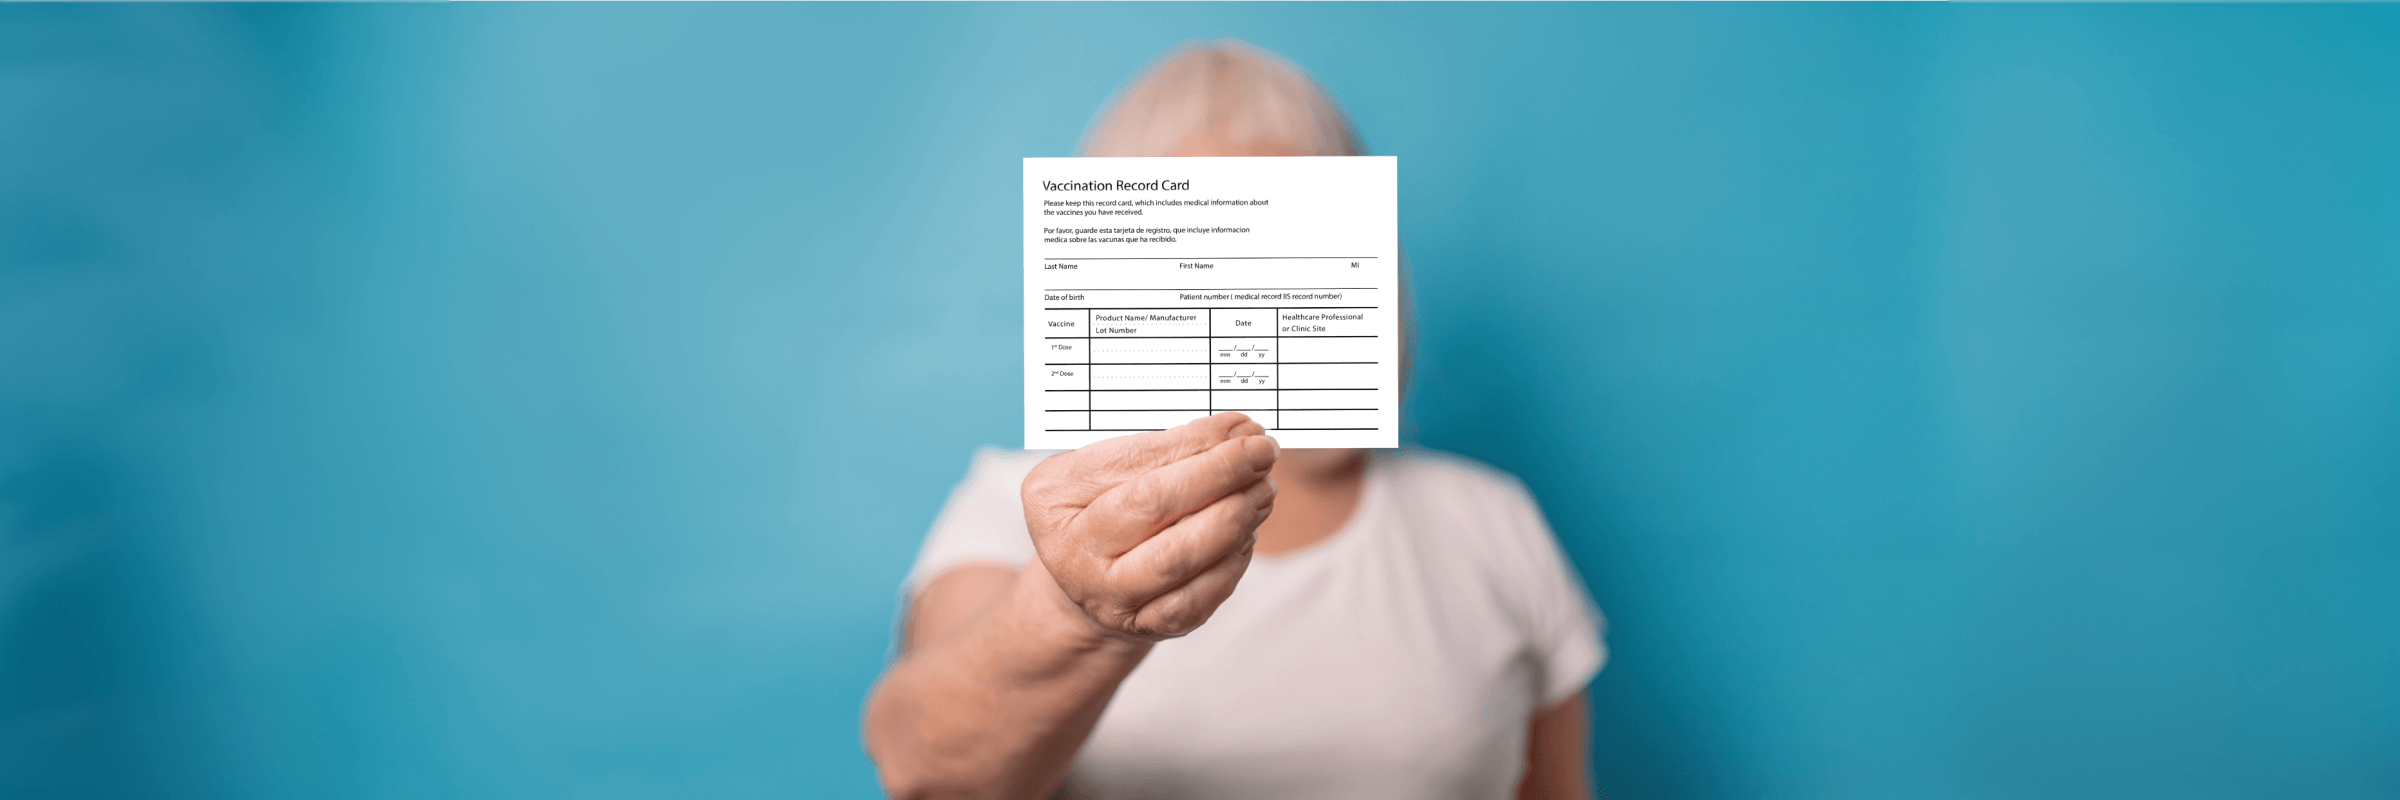 Patient holding up vaccination record card